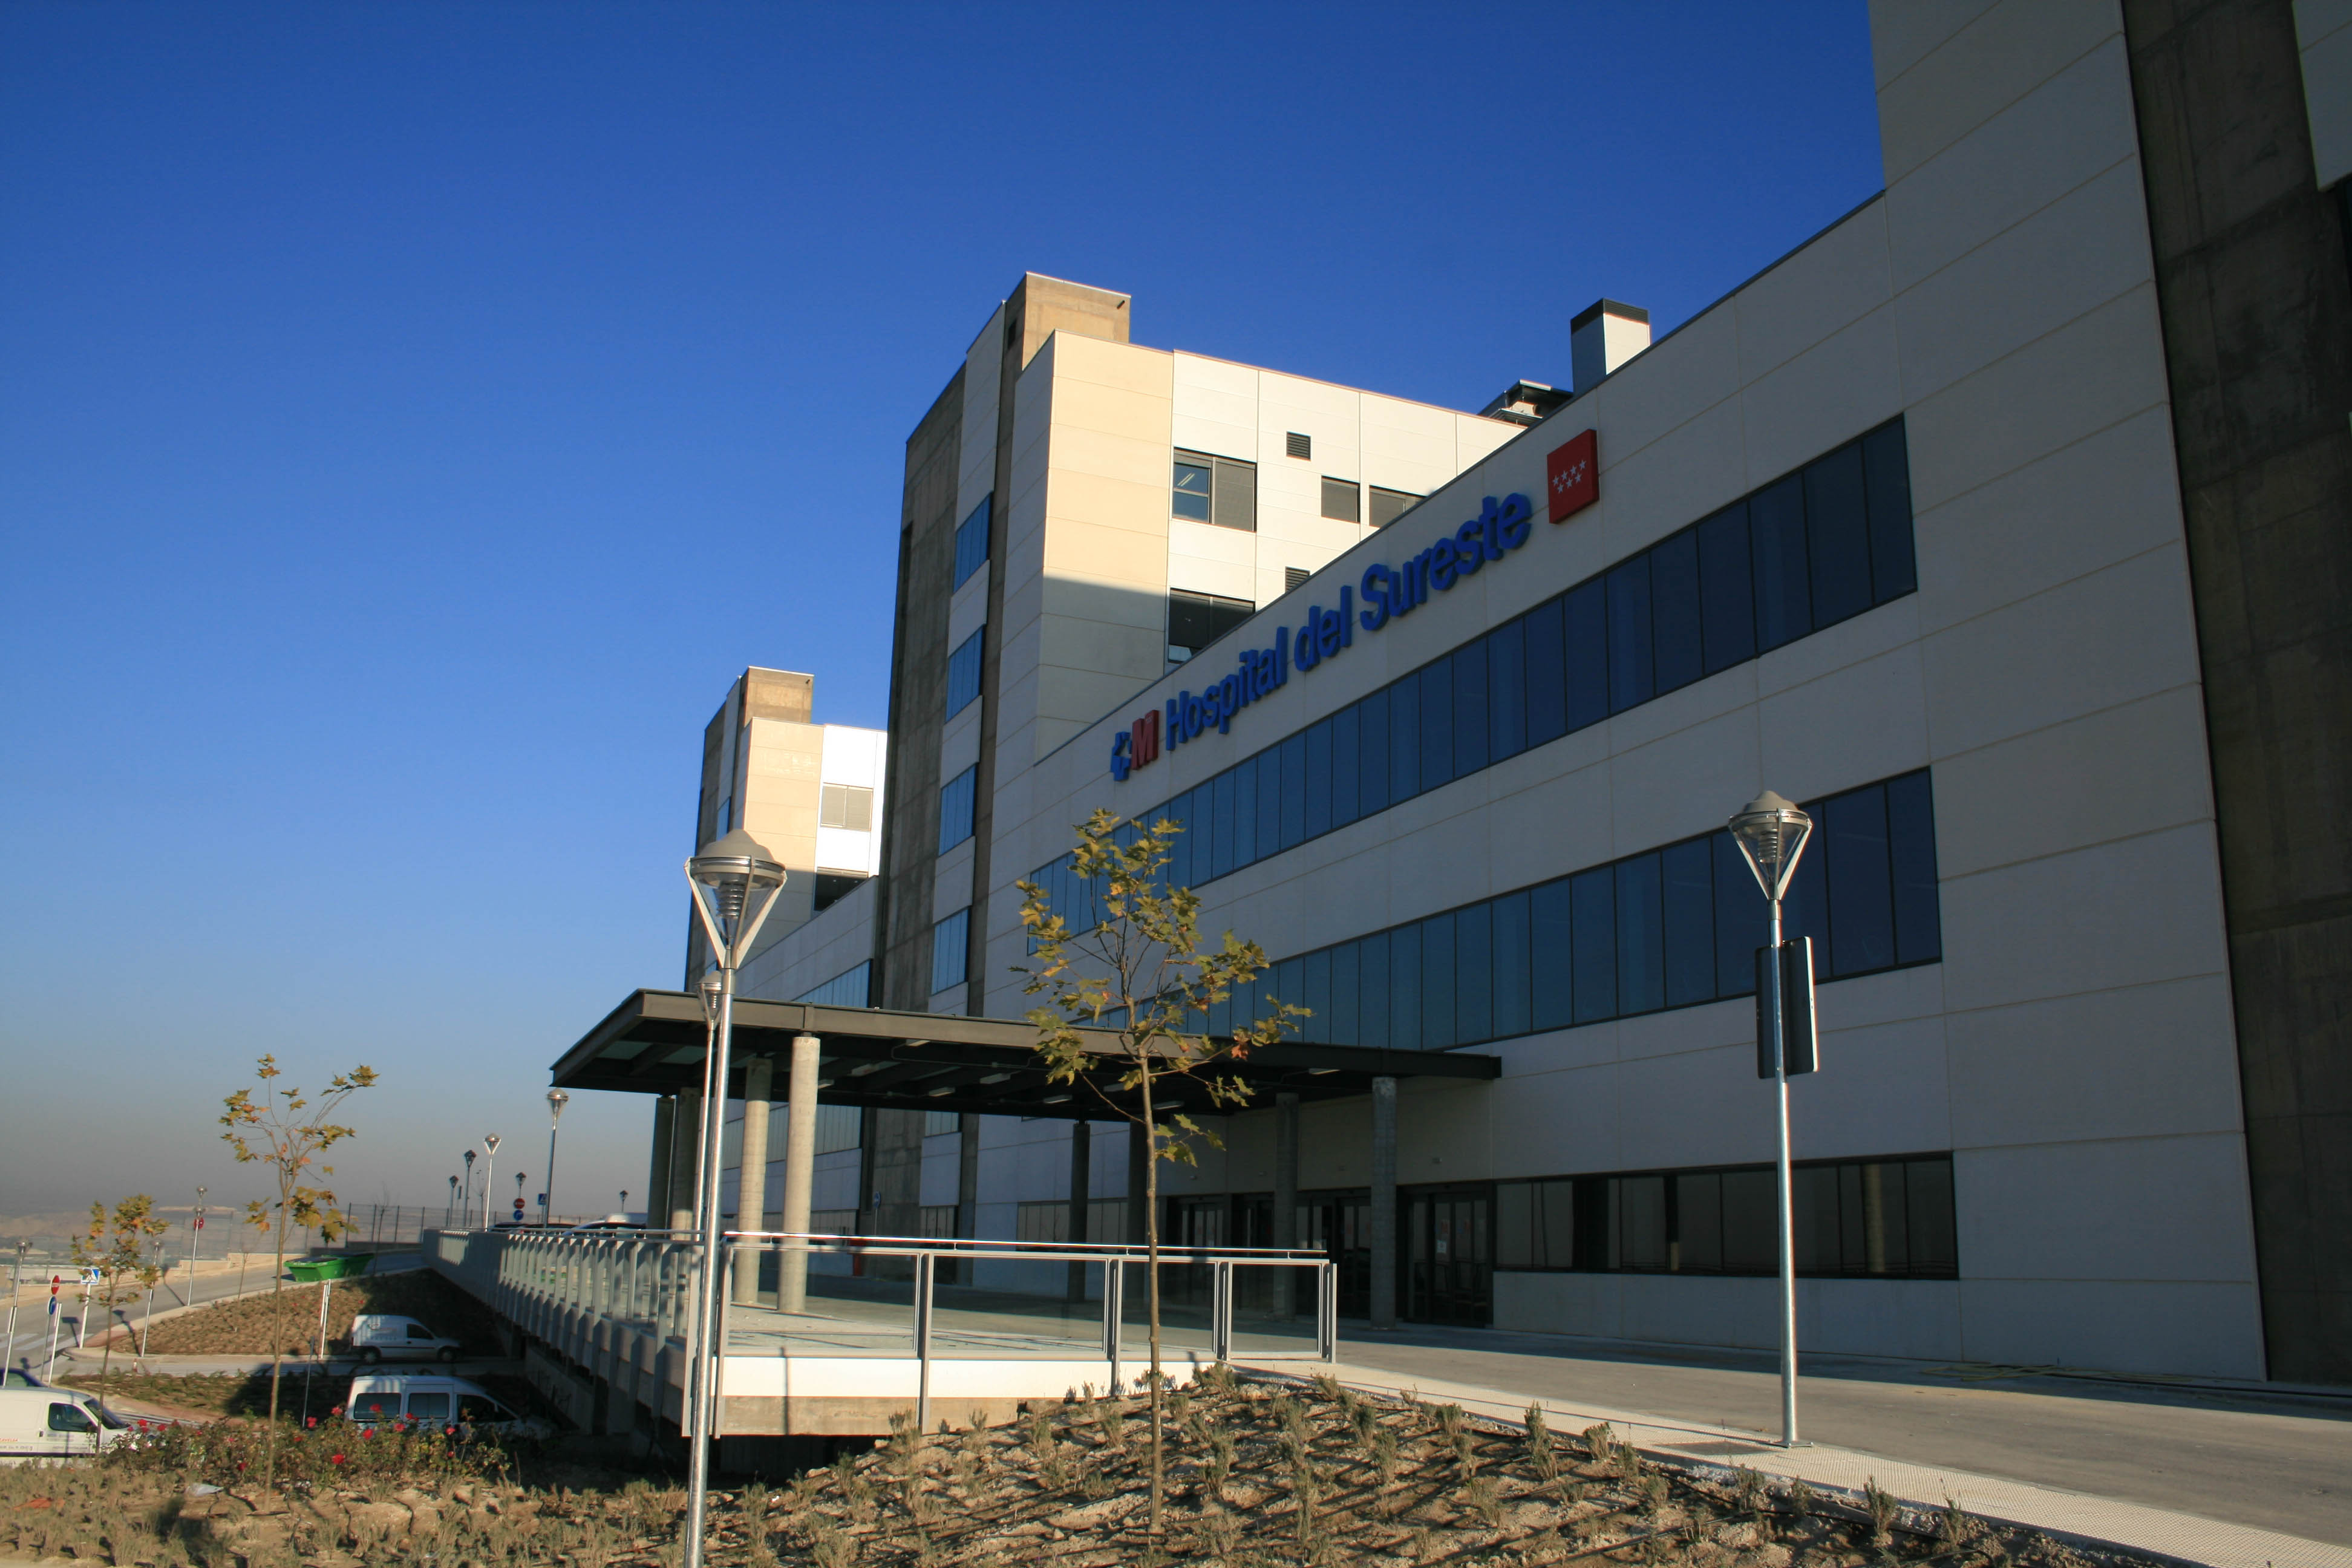 Lateral Hospital